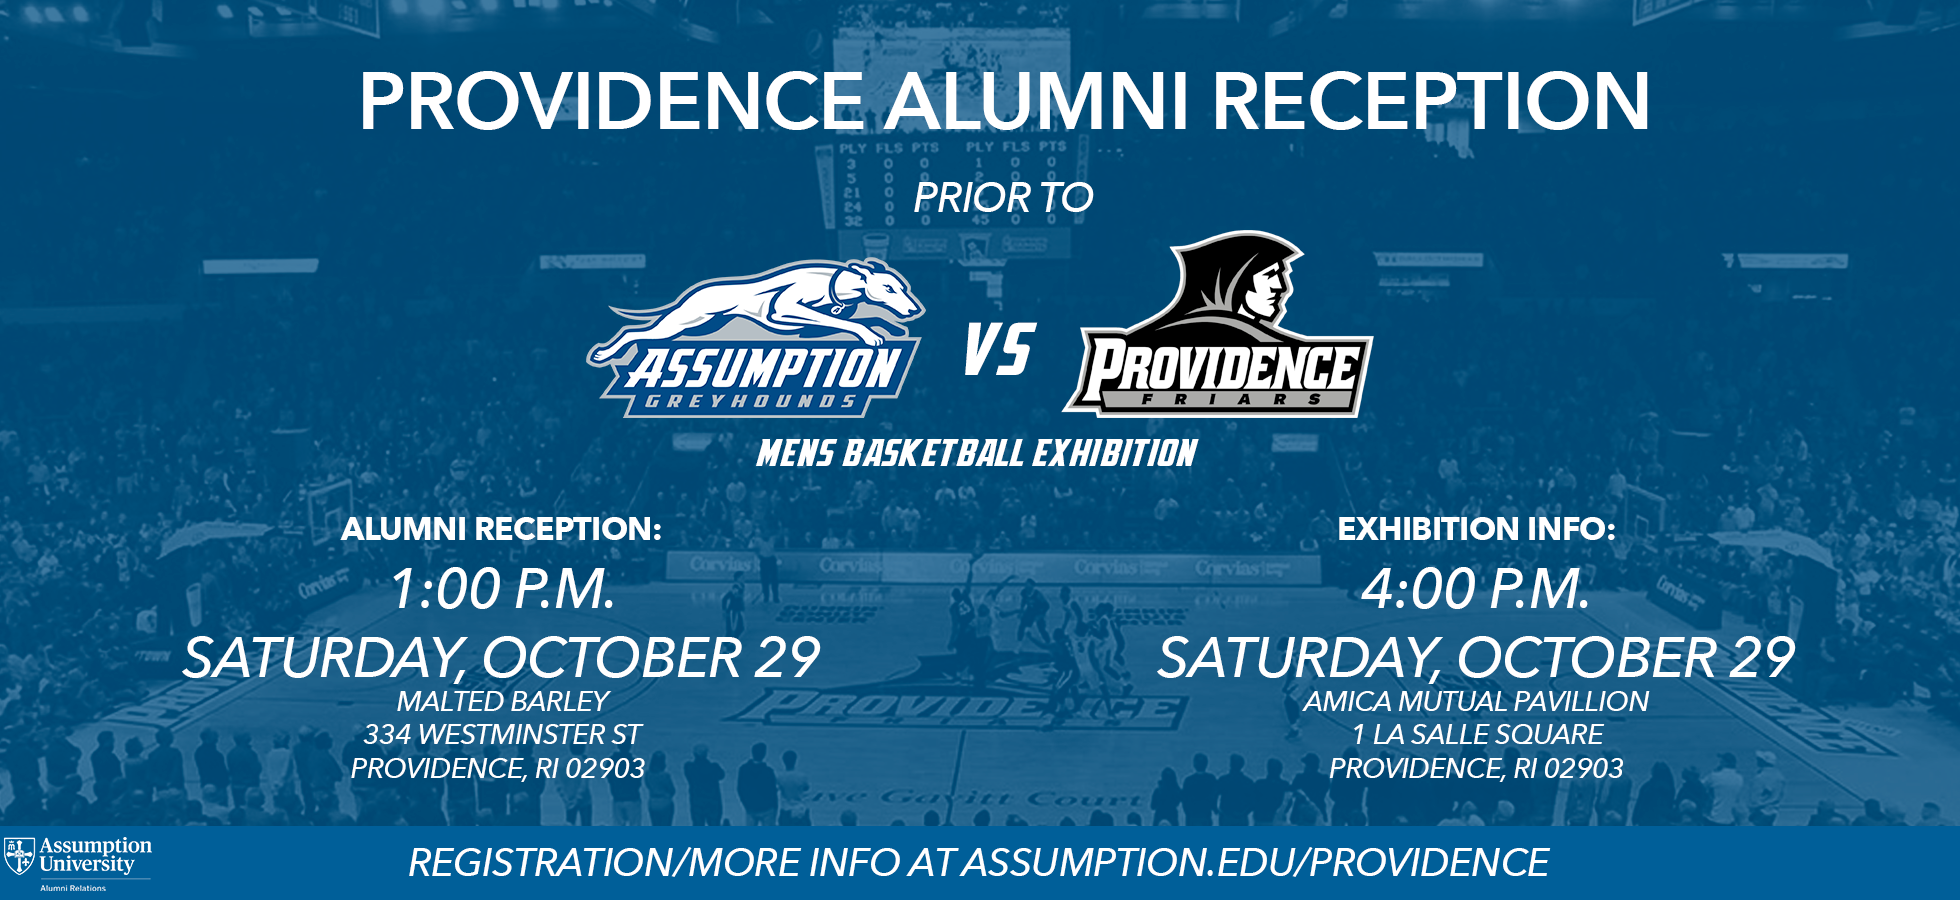 Providence RI Assumption University/College Alumni Reception will be held at Malted Barley on Saturday, October 29 at 1:00 P.M.